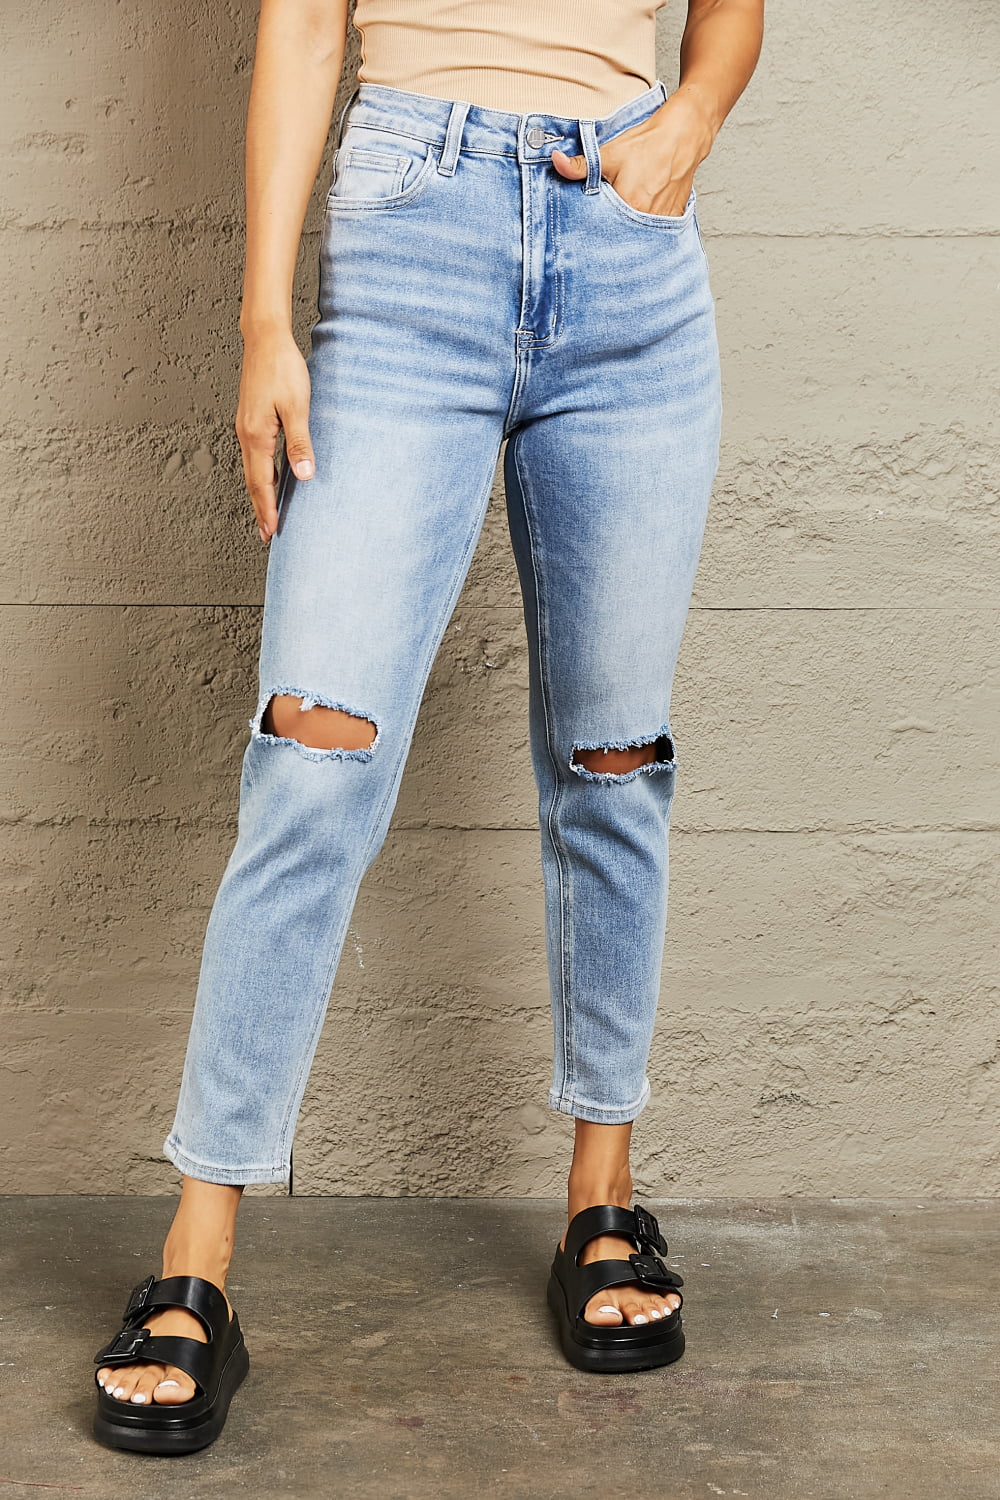 BAYEAS High Waisted Distressed Slim Cropped Jeans - Jeans - FITGGINS